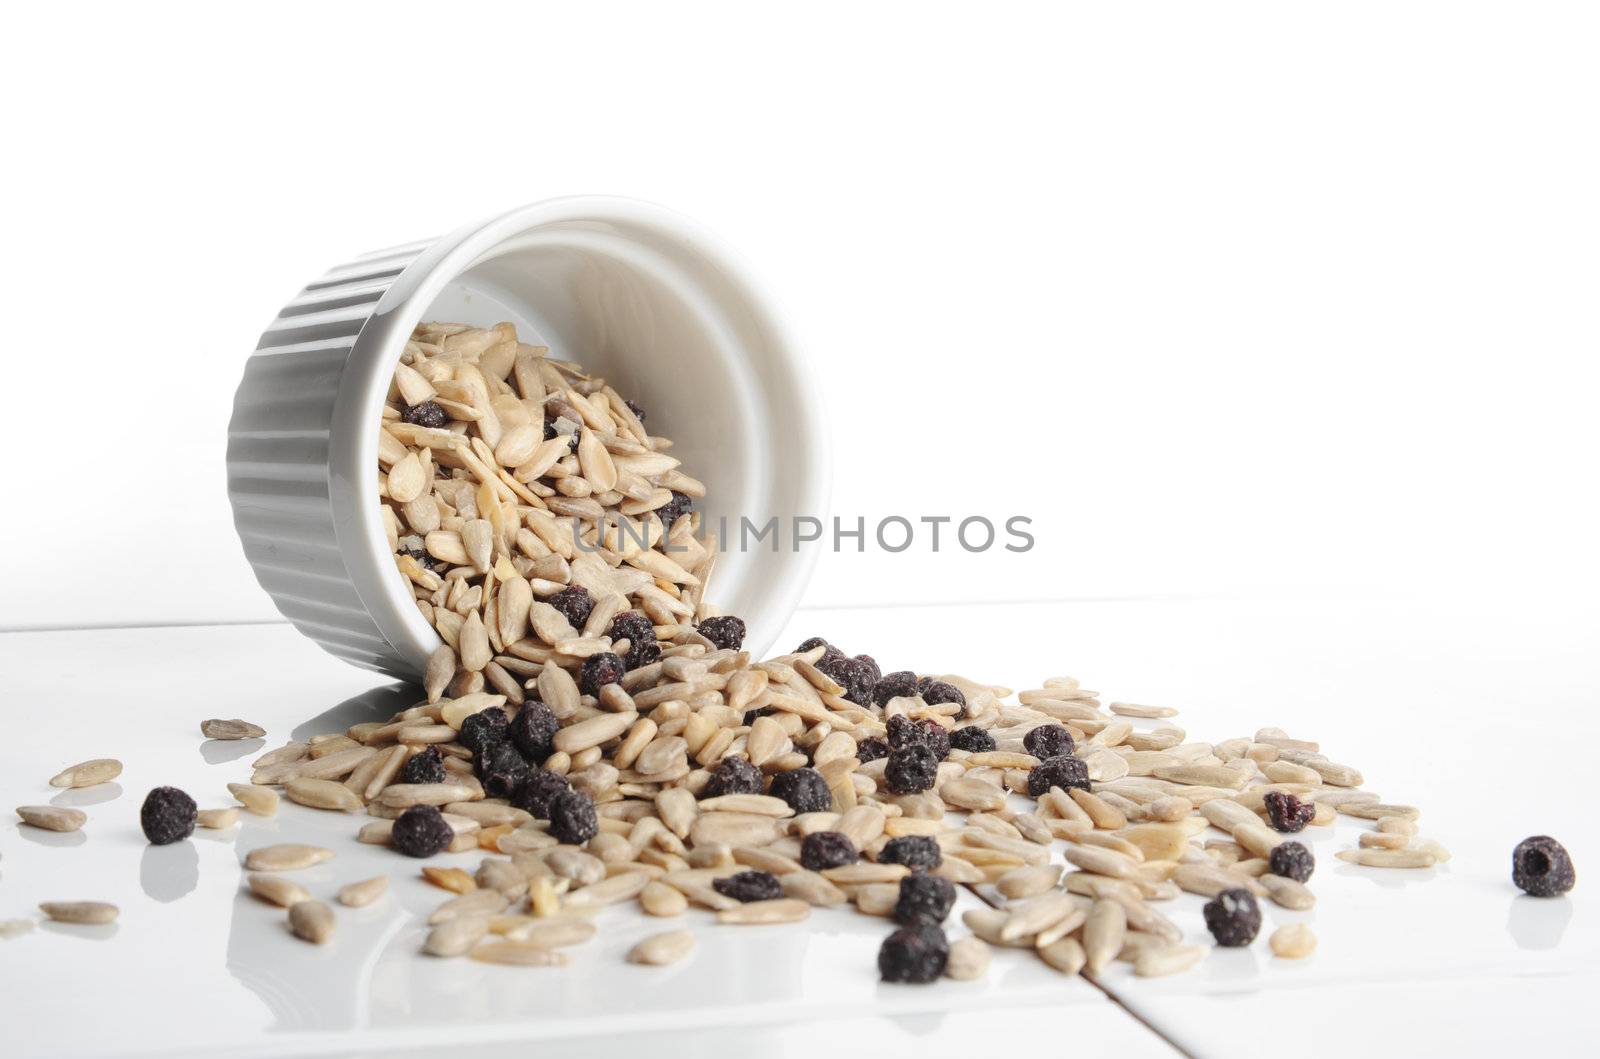 Sunflower seeds and raisins in a small white cup and scattered on a ceramic table